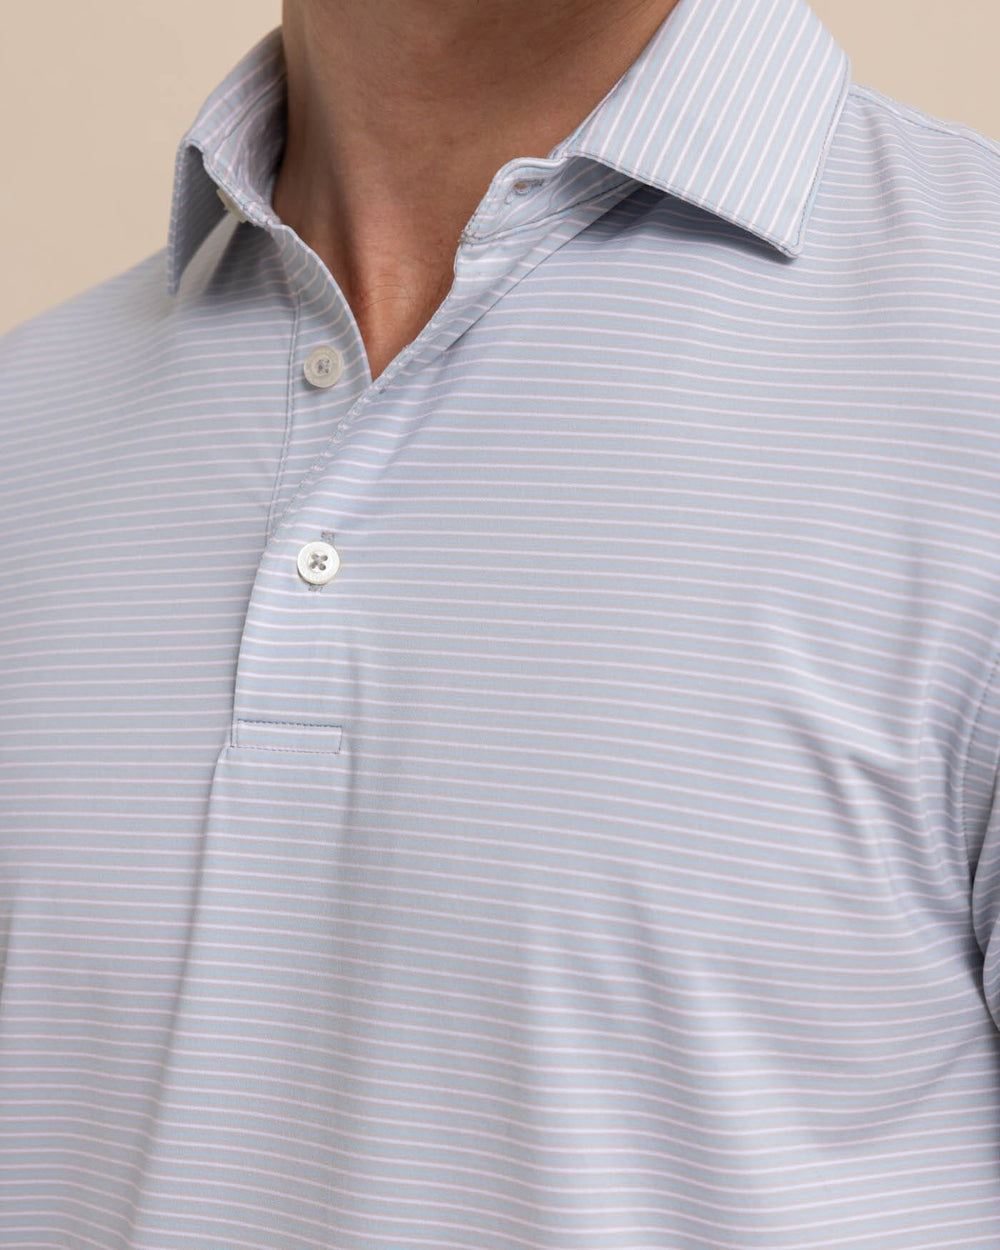 The detail view of the Southern Tide brrr-eeze Baytop Stripe Performance Polo by Southern Tide - Platinum Grey